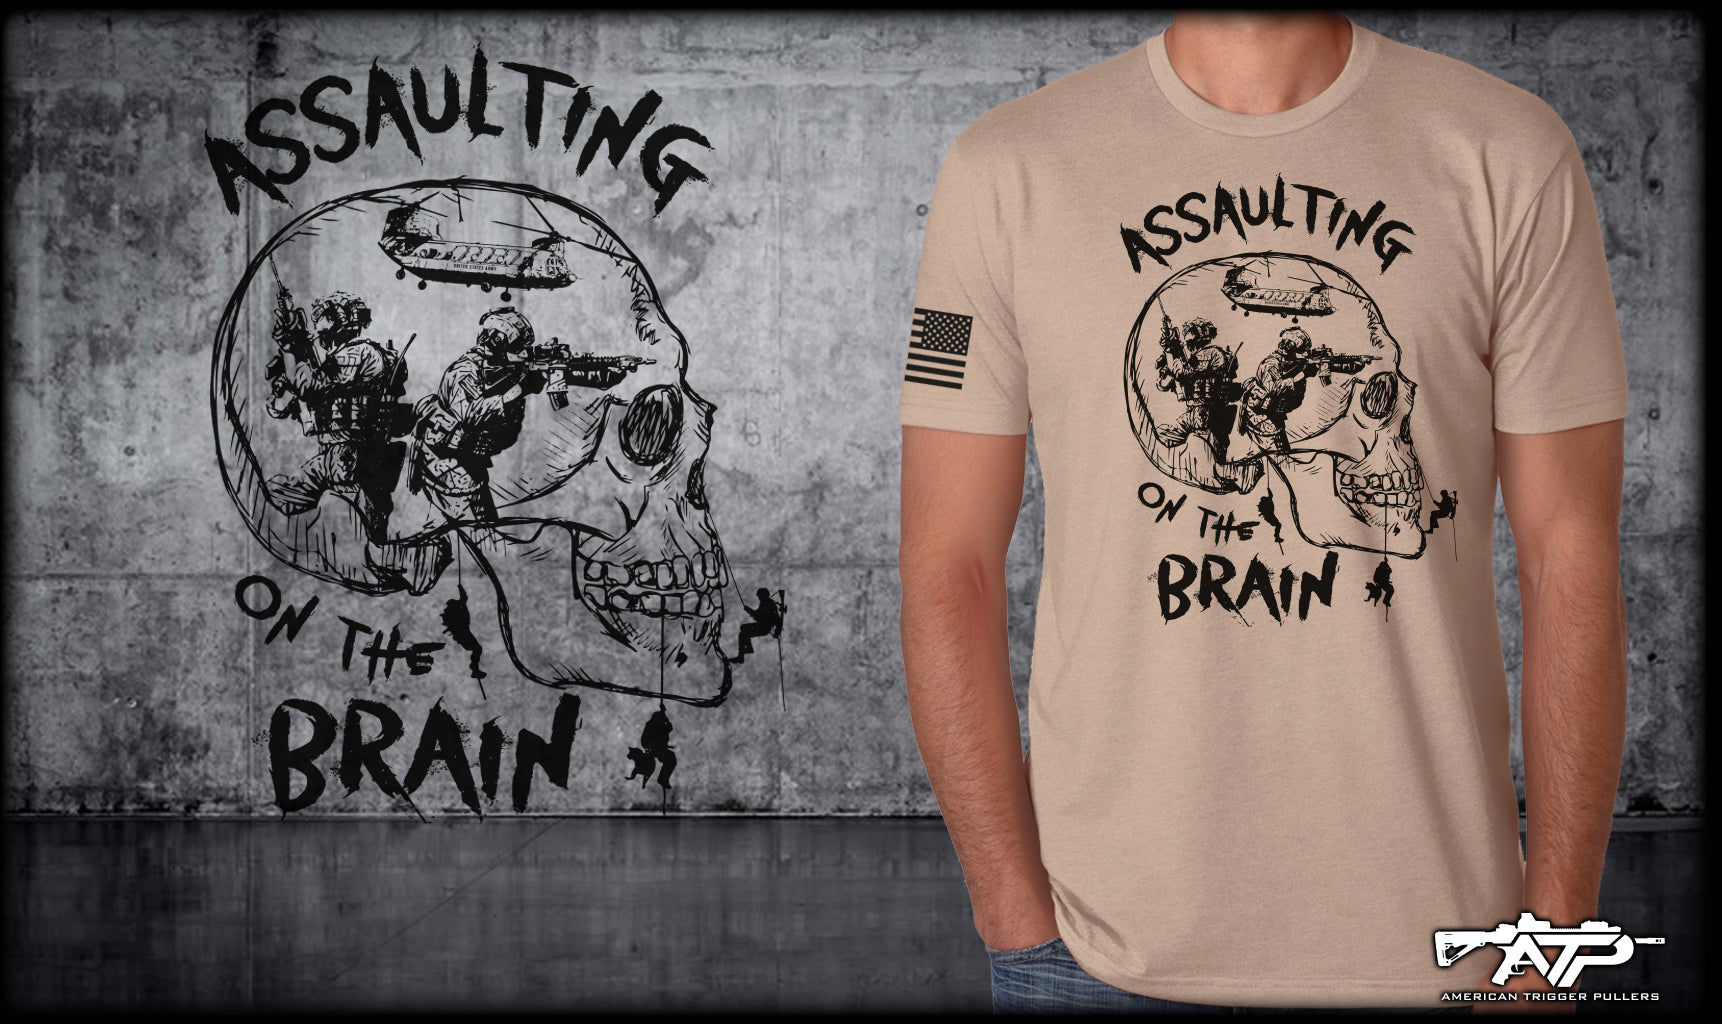 Assaulting on the Brain